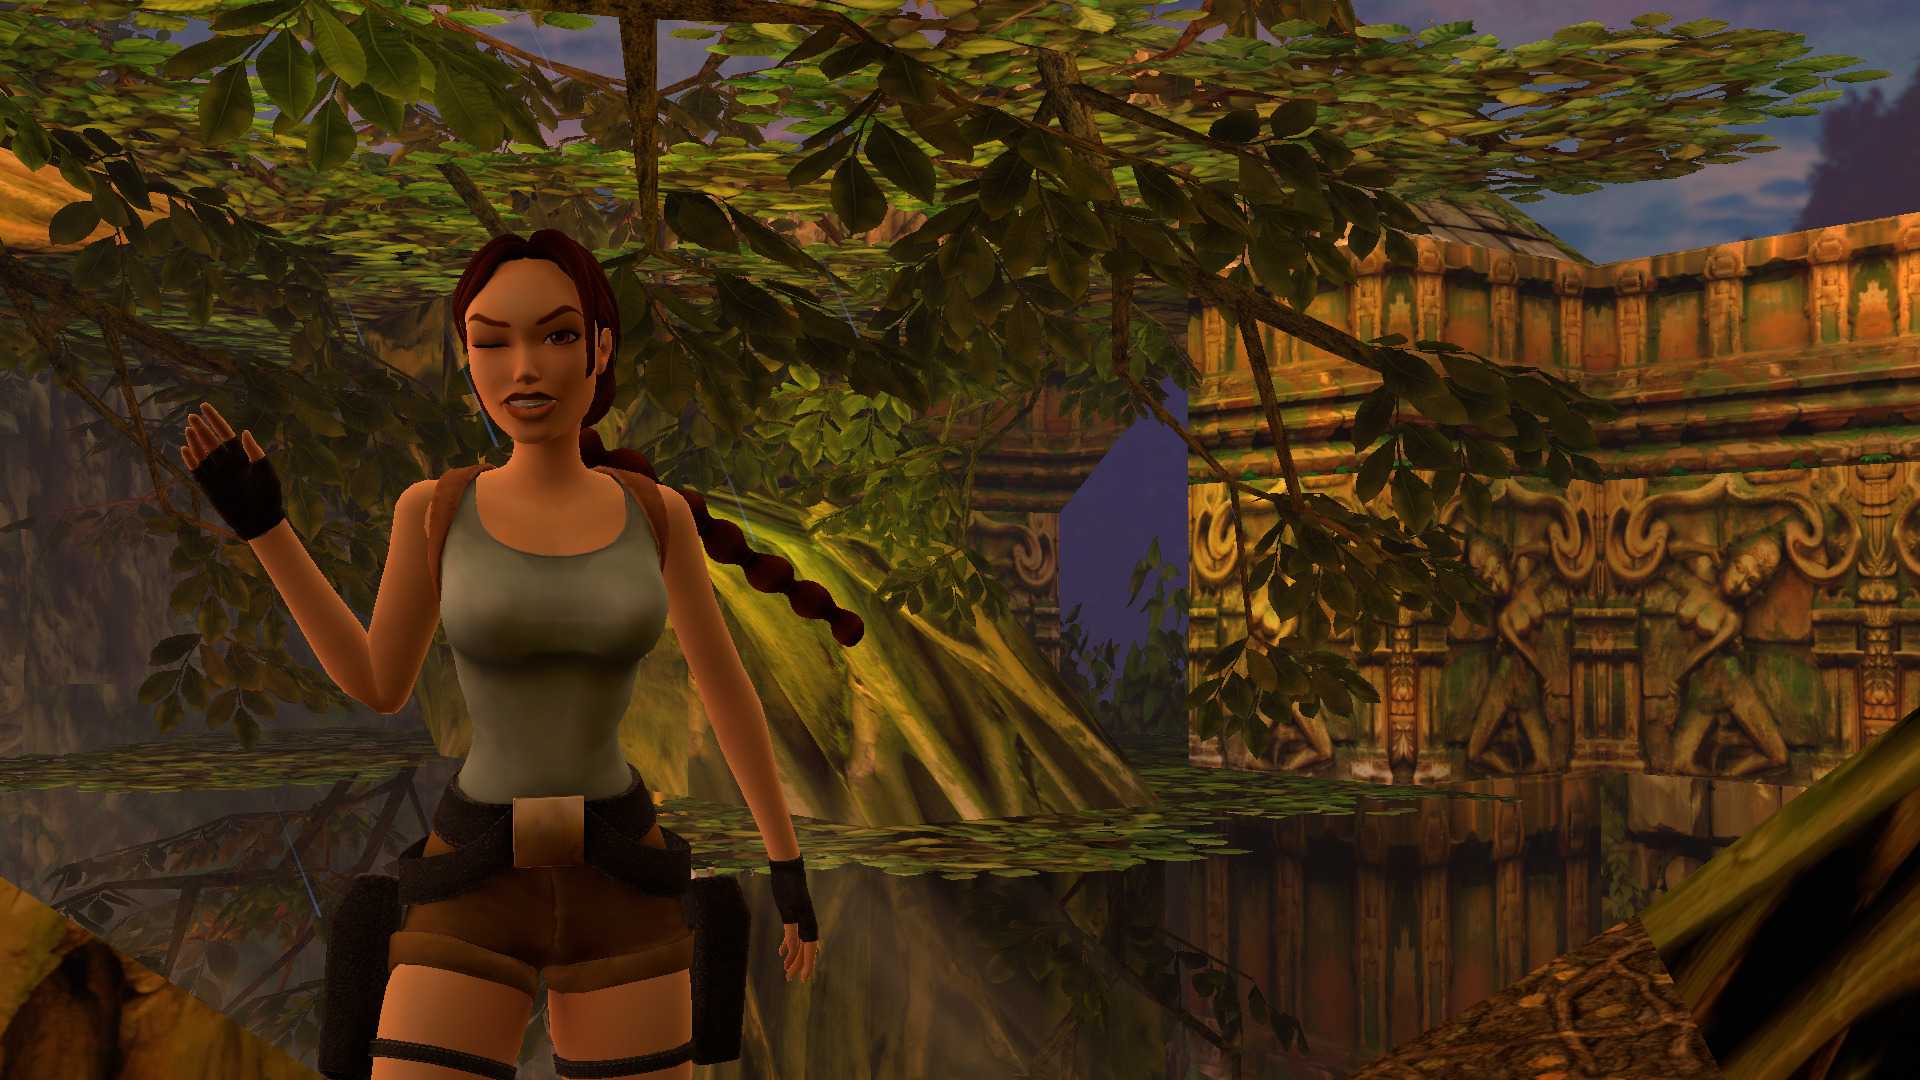 REVIEW: Relive the good old days of gaming with the Tomb Raider Remastered  I-III Starring Lara Croft collection